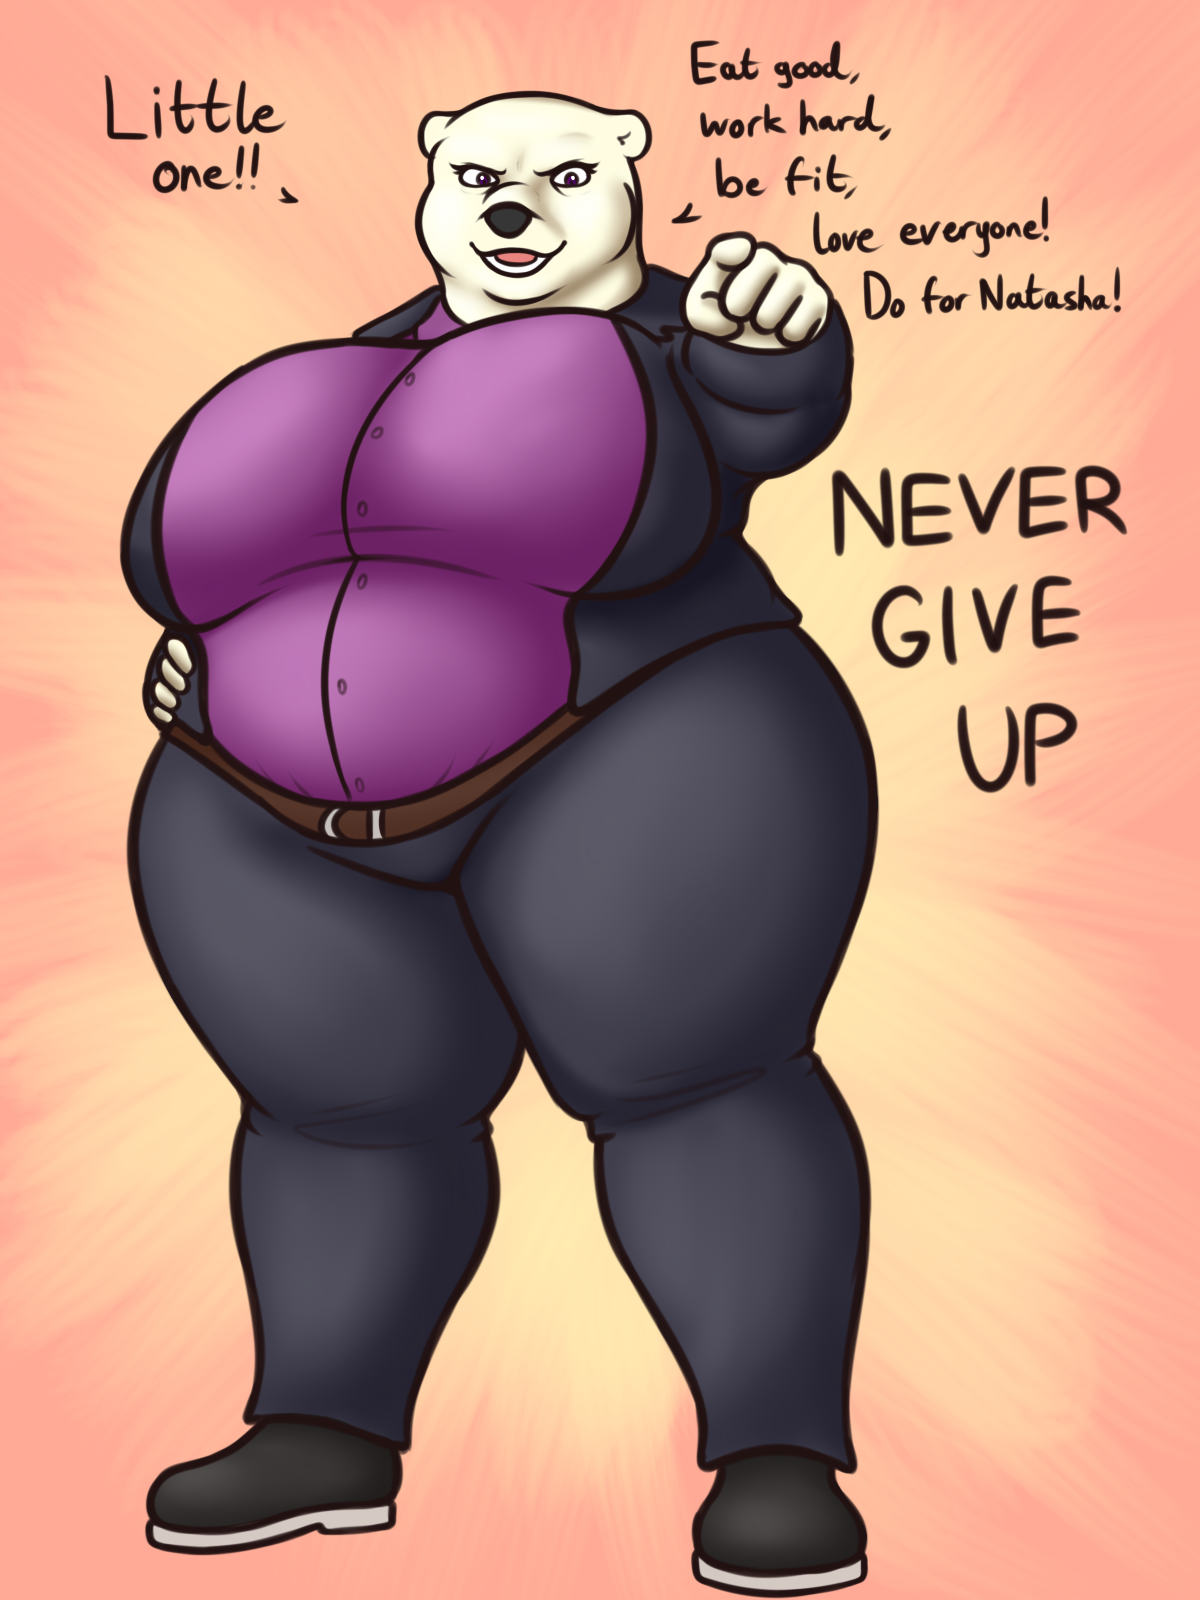 Natasha believes in you! by oystercatcher7 -- Fur Affinity [dot] net